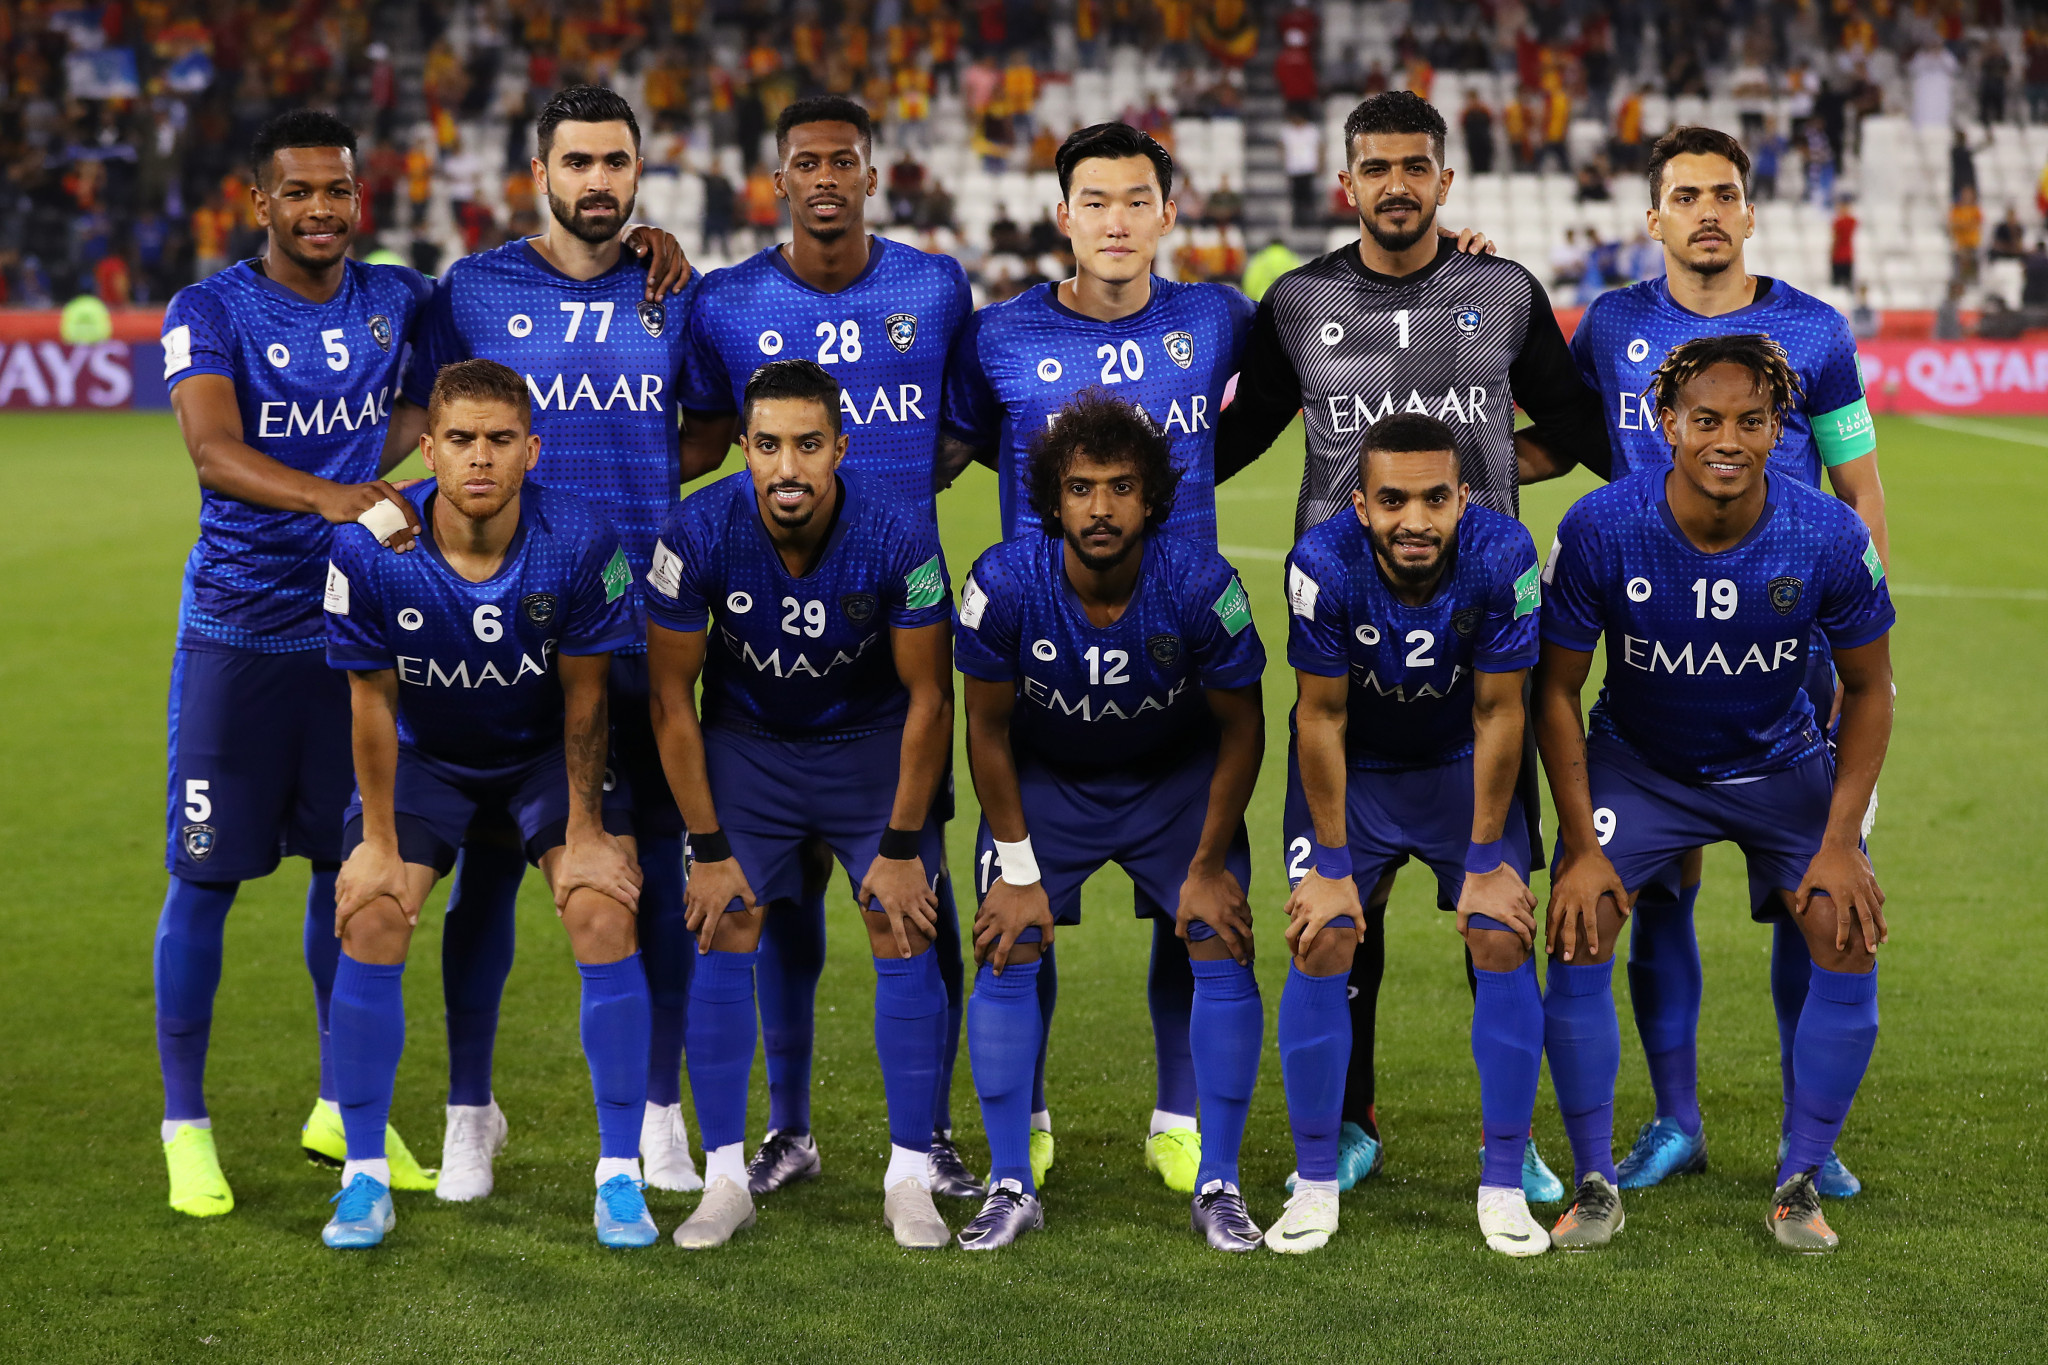 Saudi Arabian team Al Hilal have been forced to withdraw from the AFC Champions League ©Getty Images 